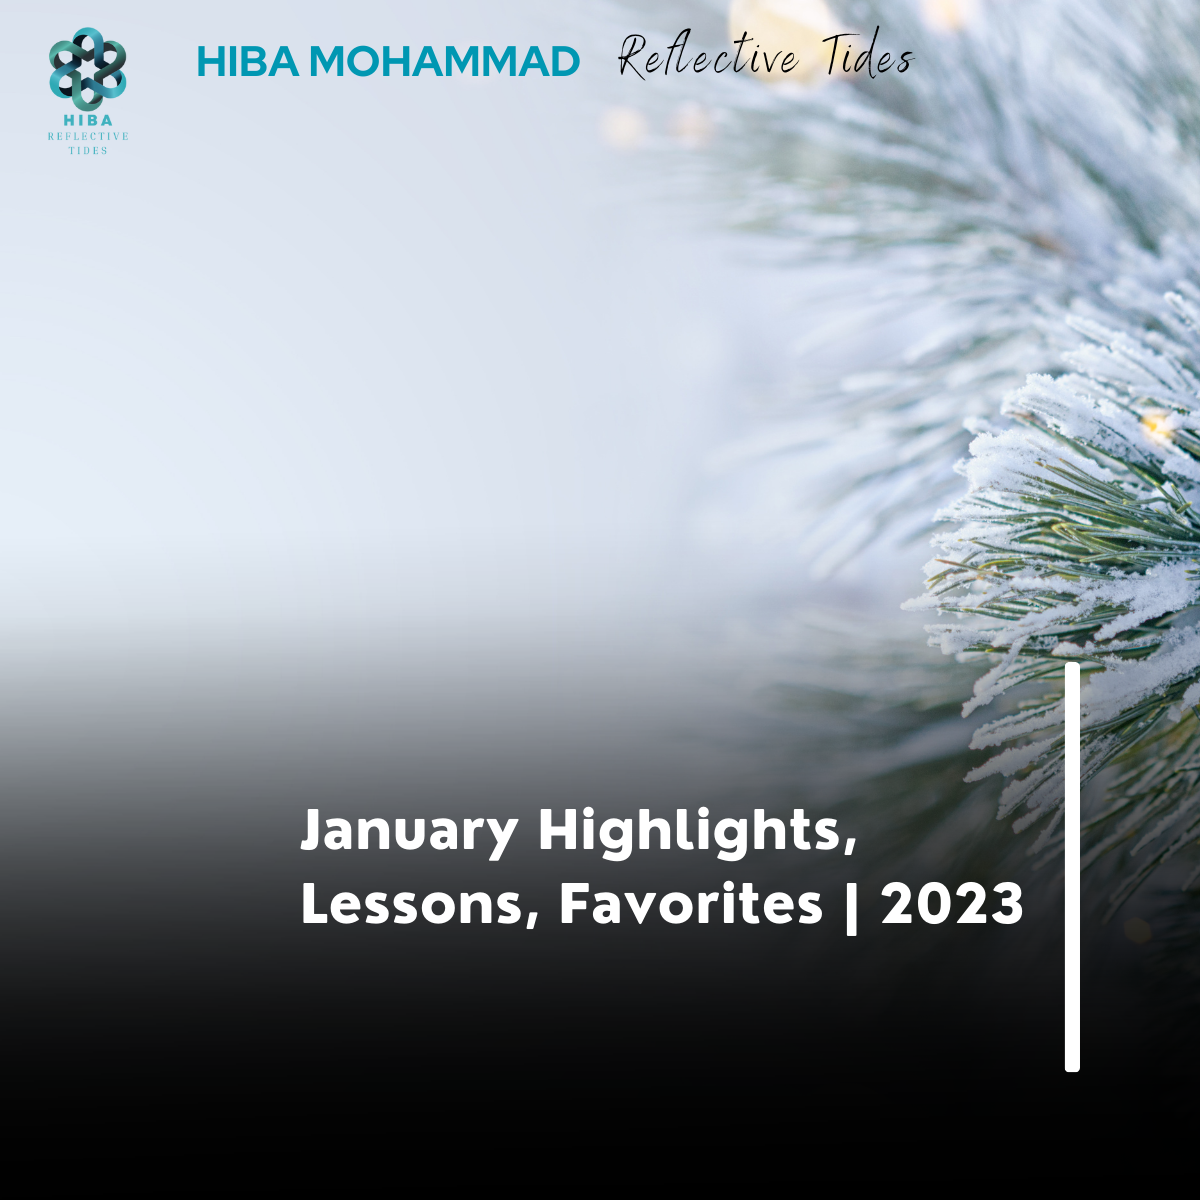 January Highlights, Lessons, Favorites | 2023